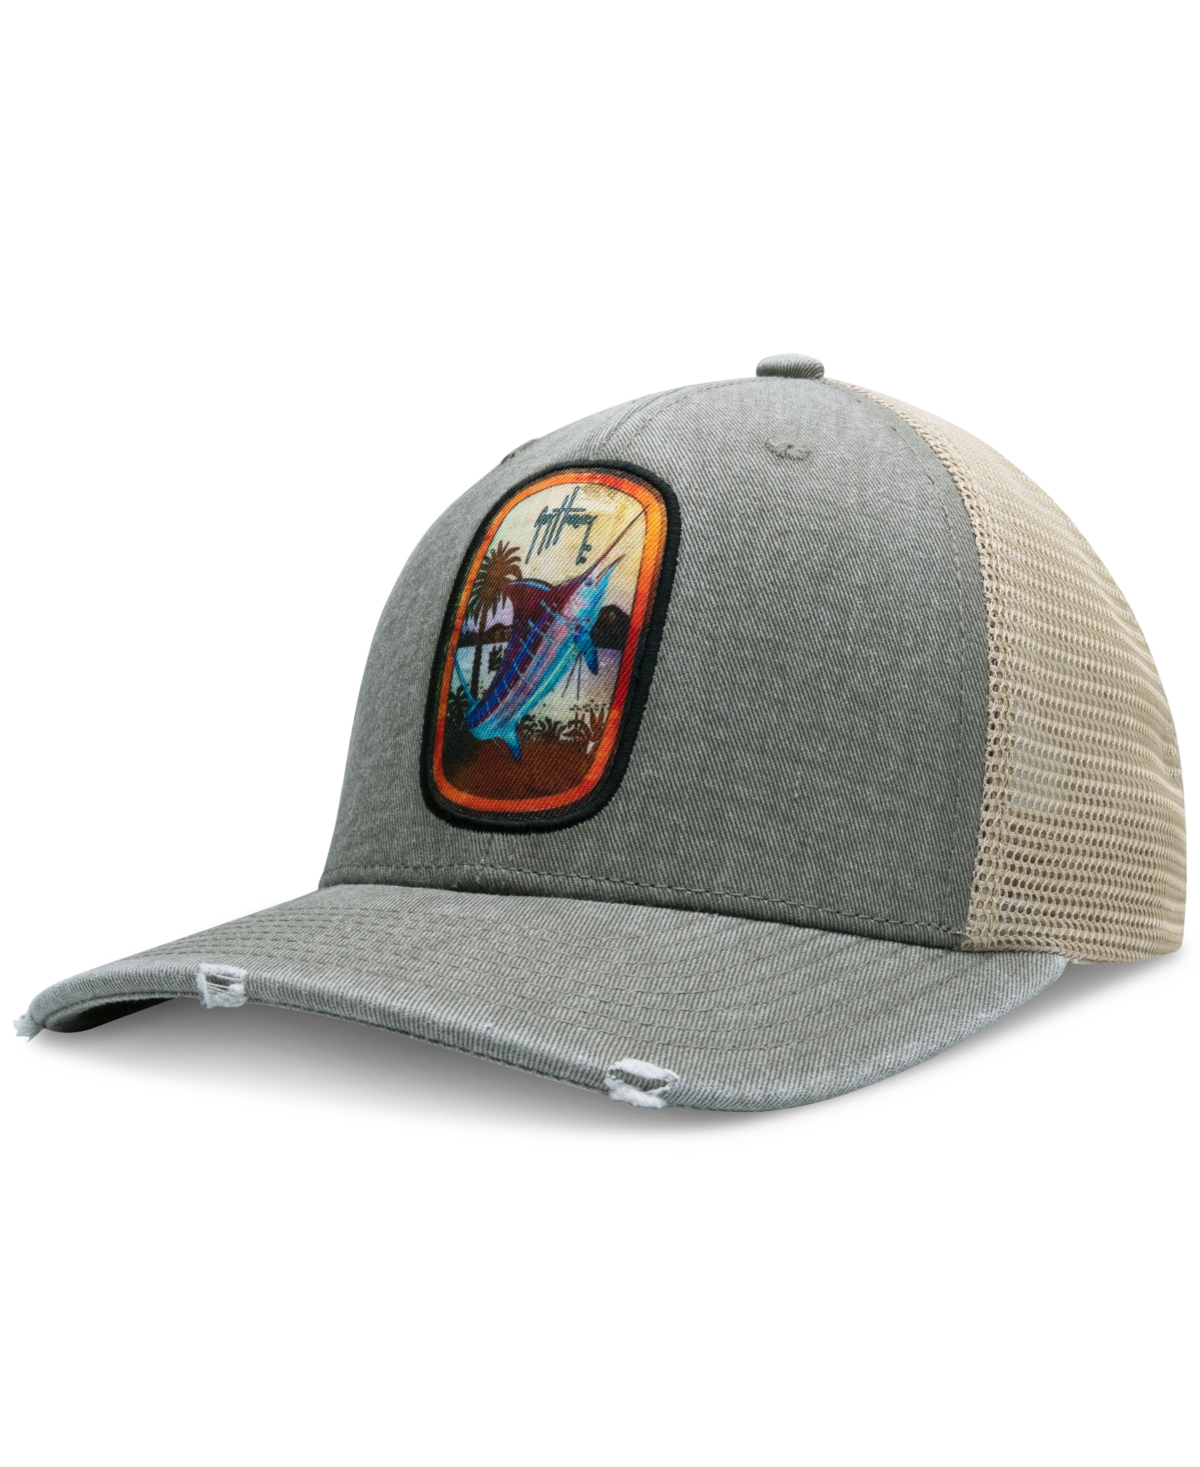 Men's Sublimated Dominica Patch Distressed Trucker Hat - Charcoal Heather